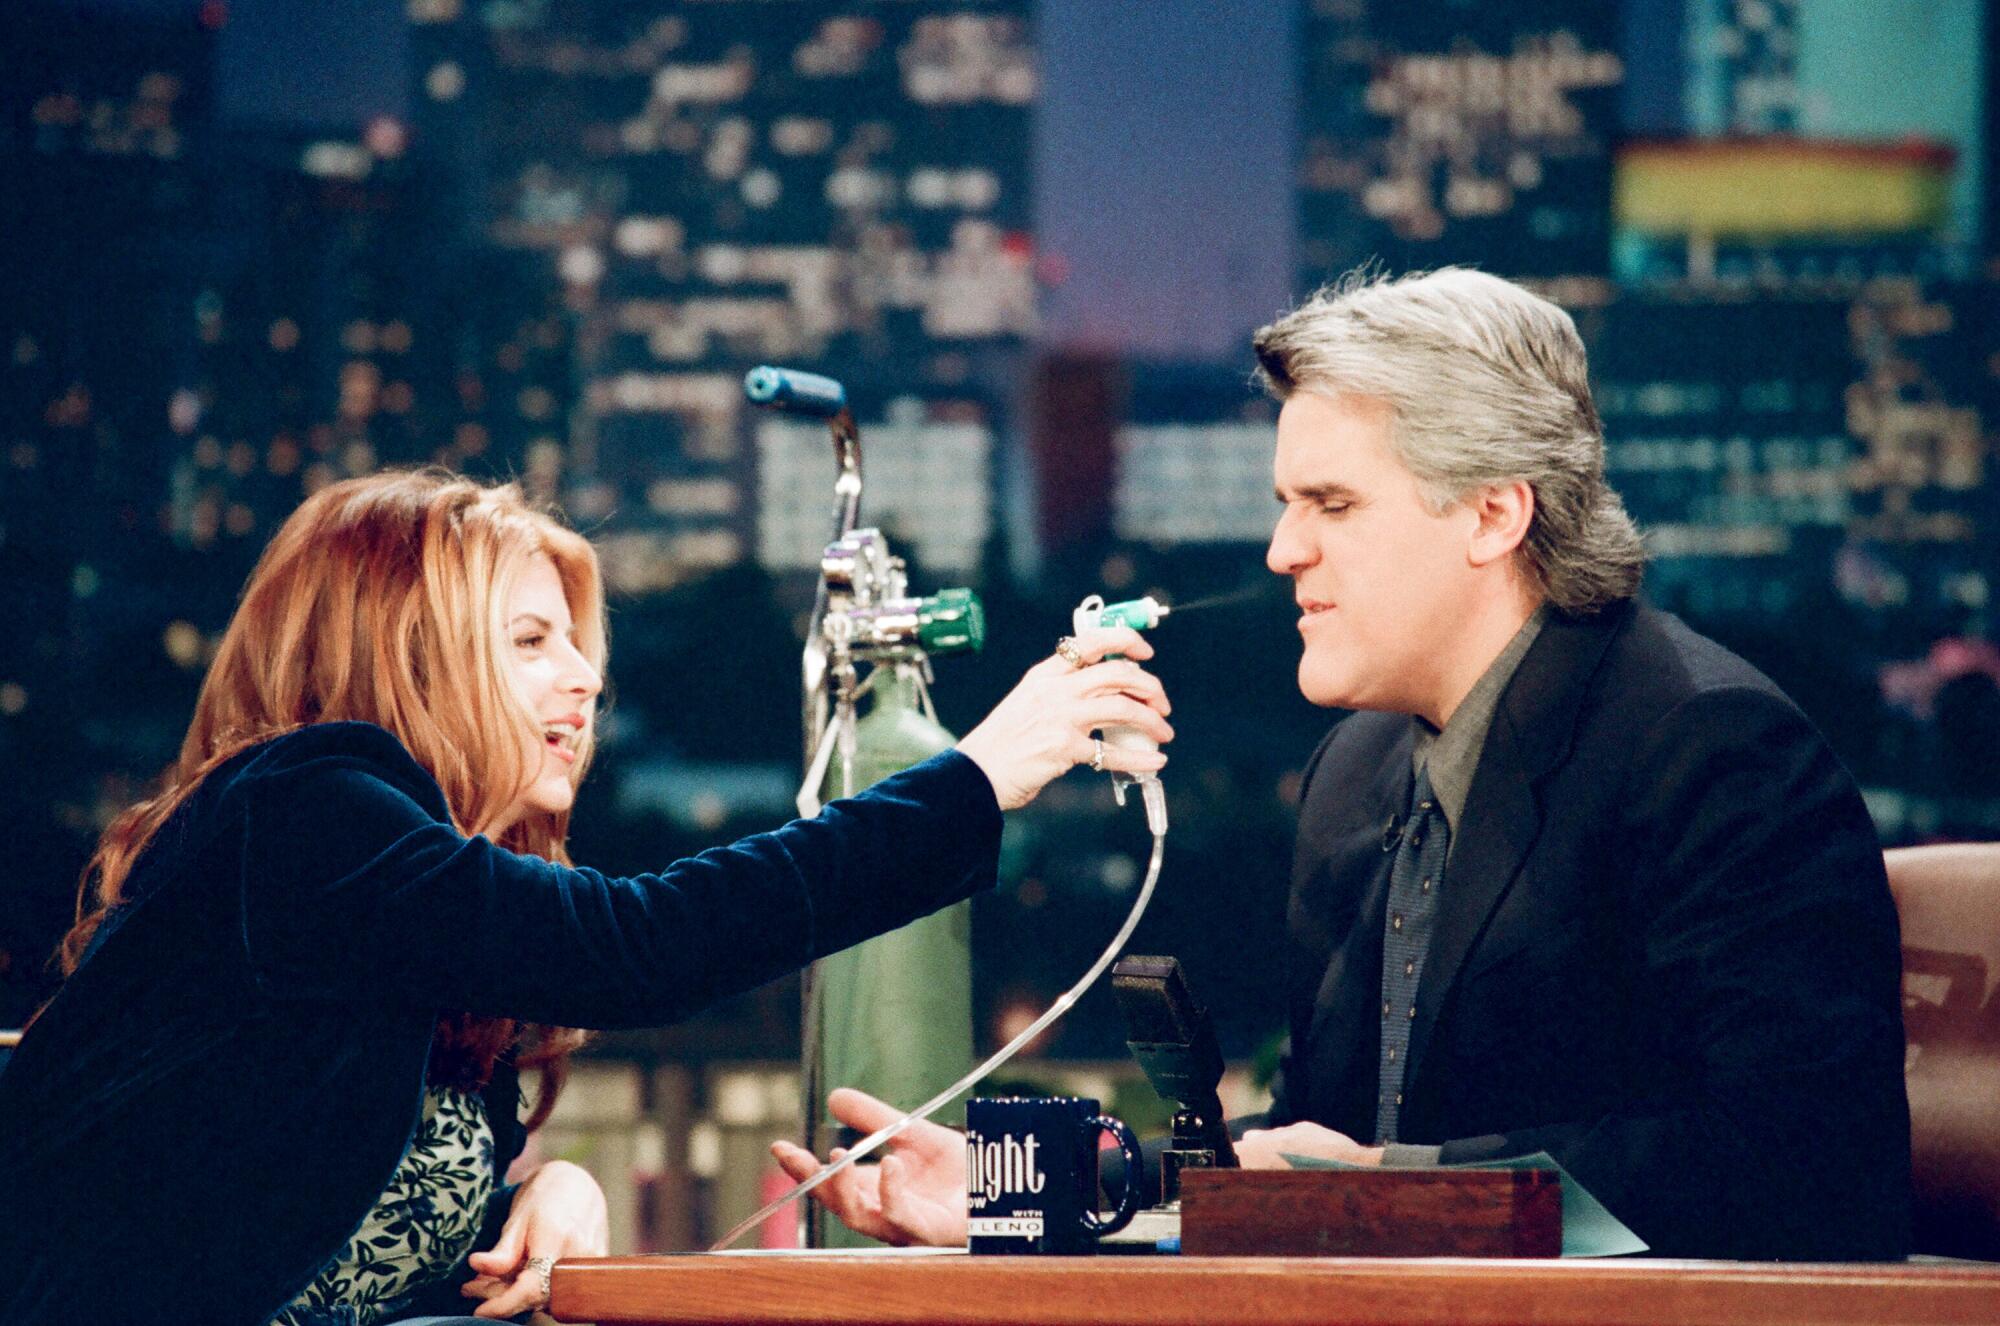  Kirstie Alley playfully sprays Jay Leno with a nozzle.